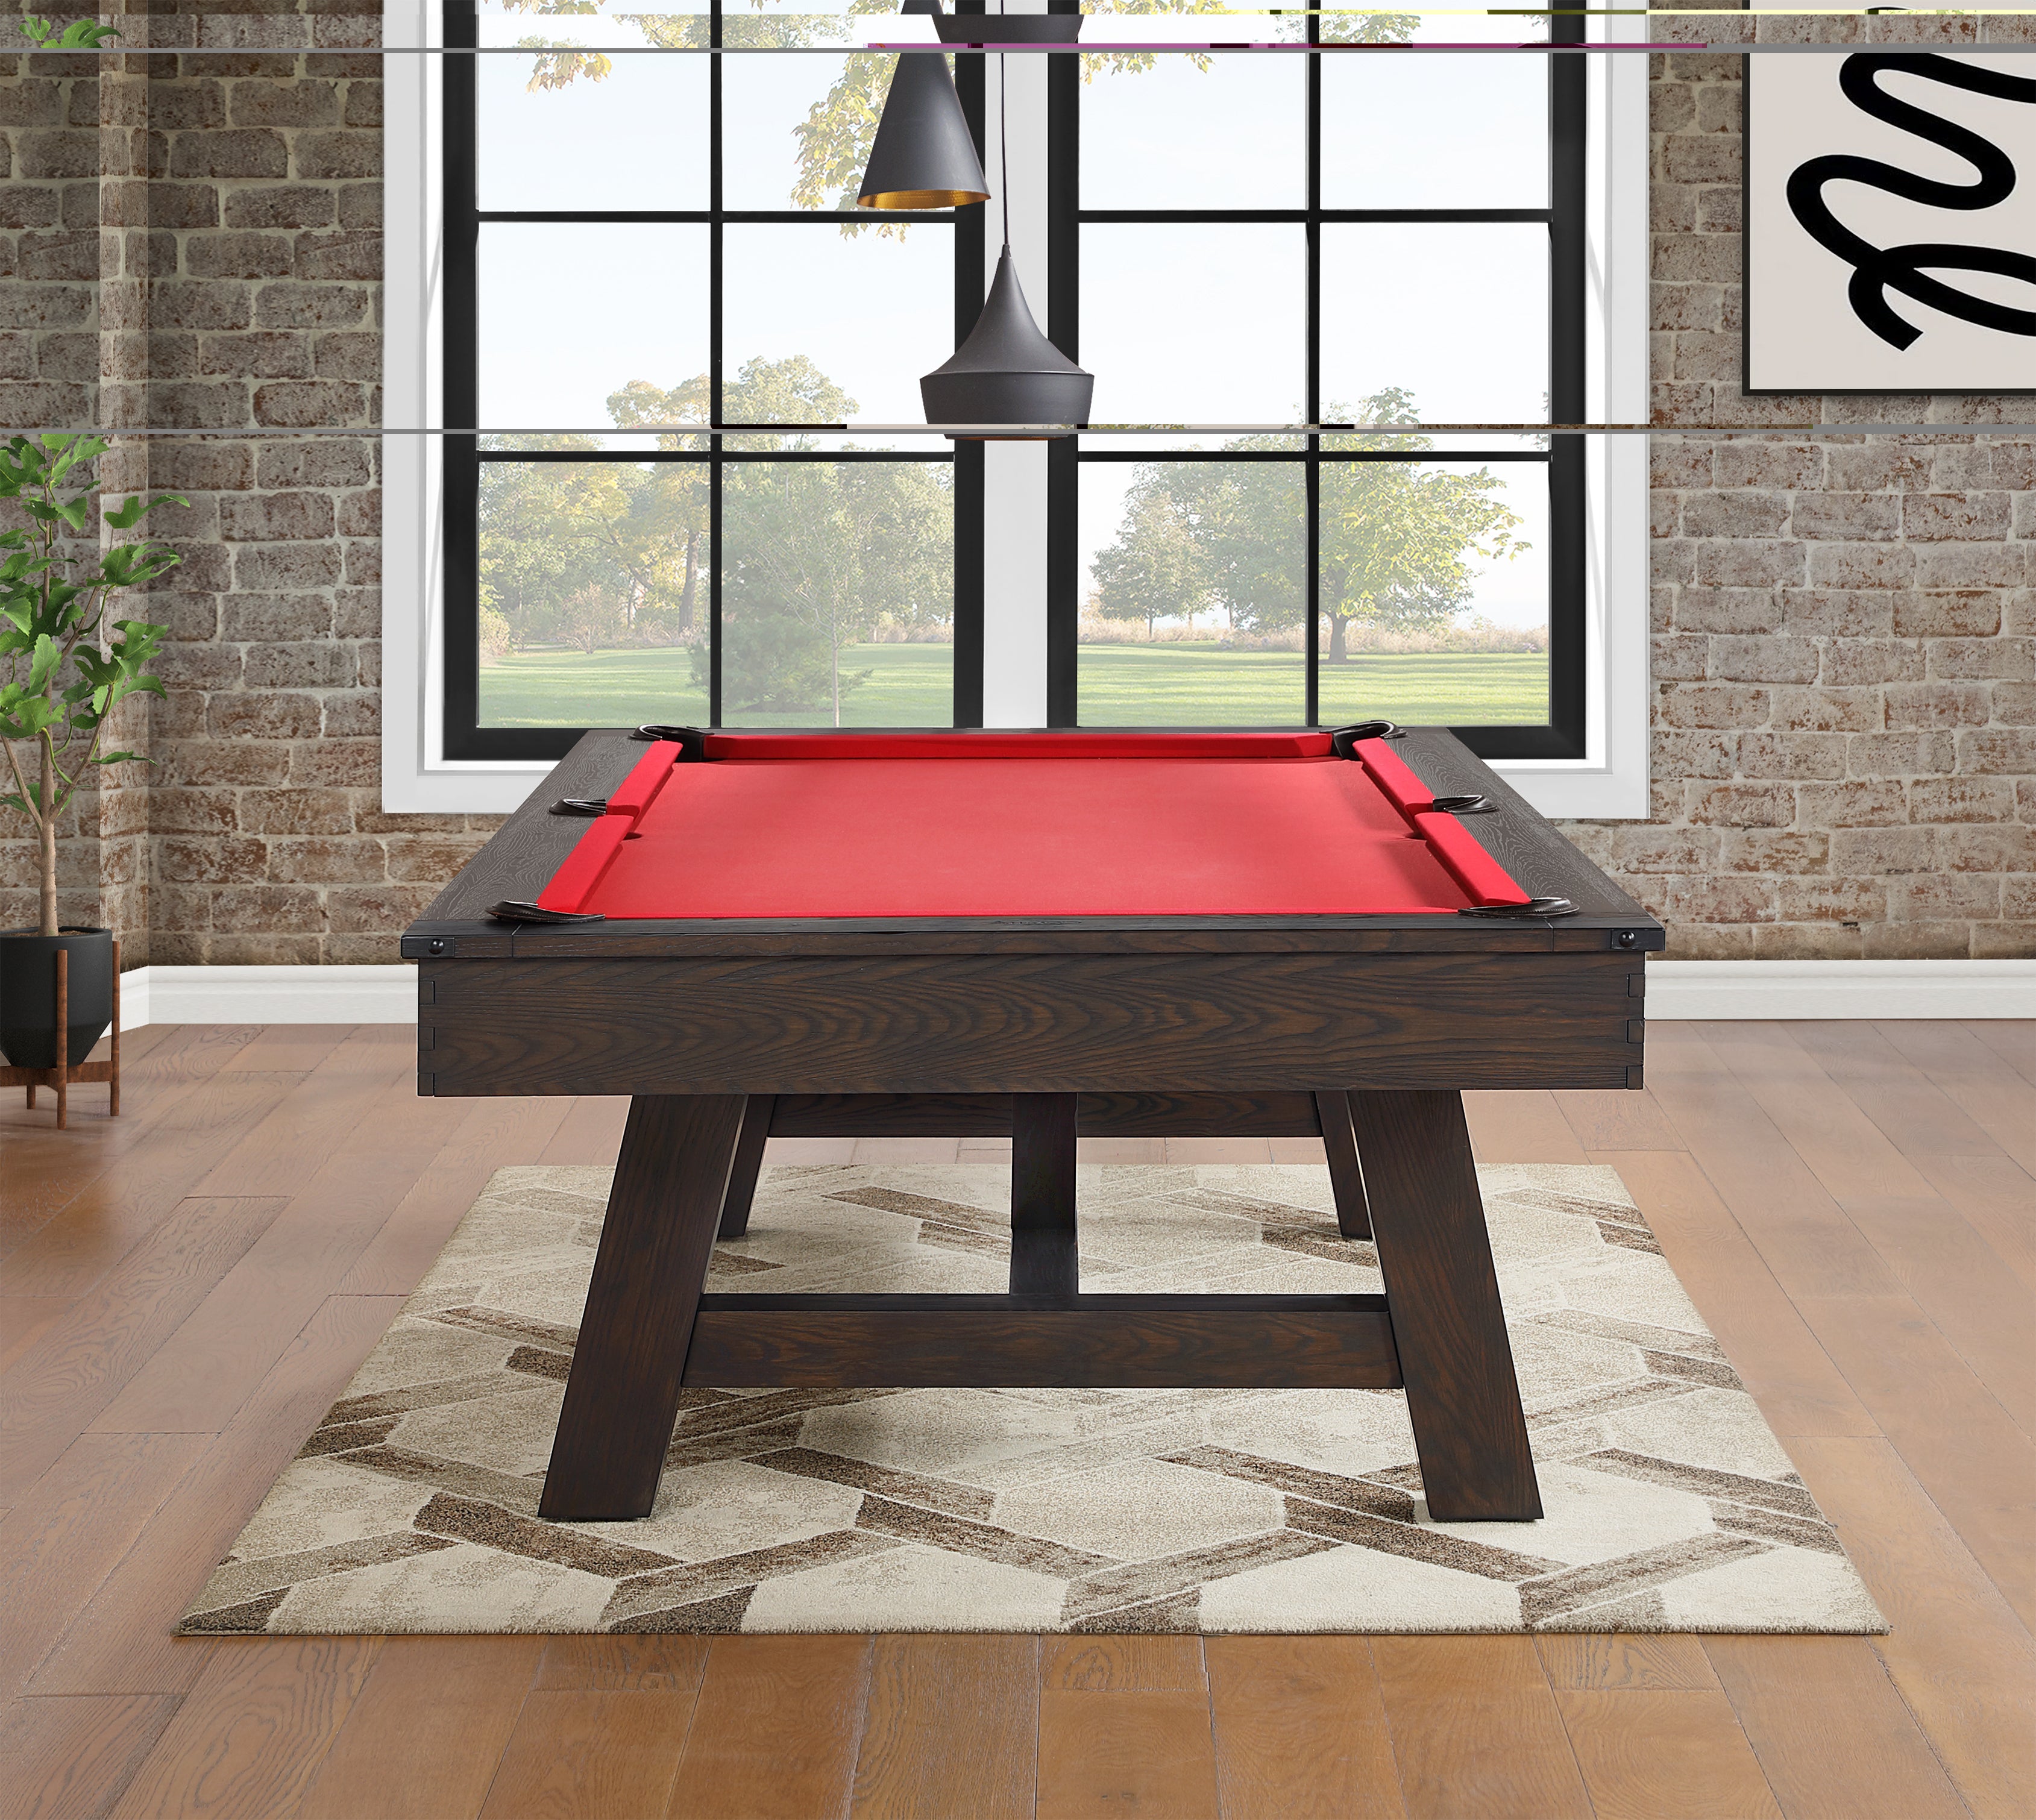 Legacy Billiards Emory Pool Table in Whiskey Barrel Finish Room Scene - End View